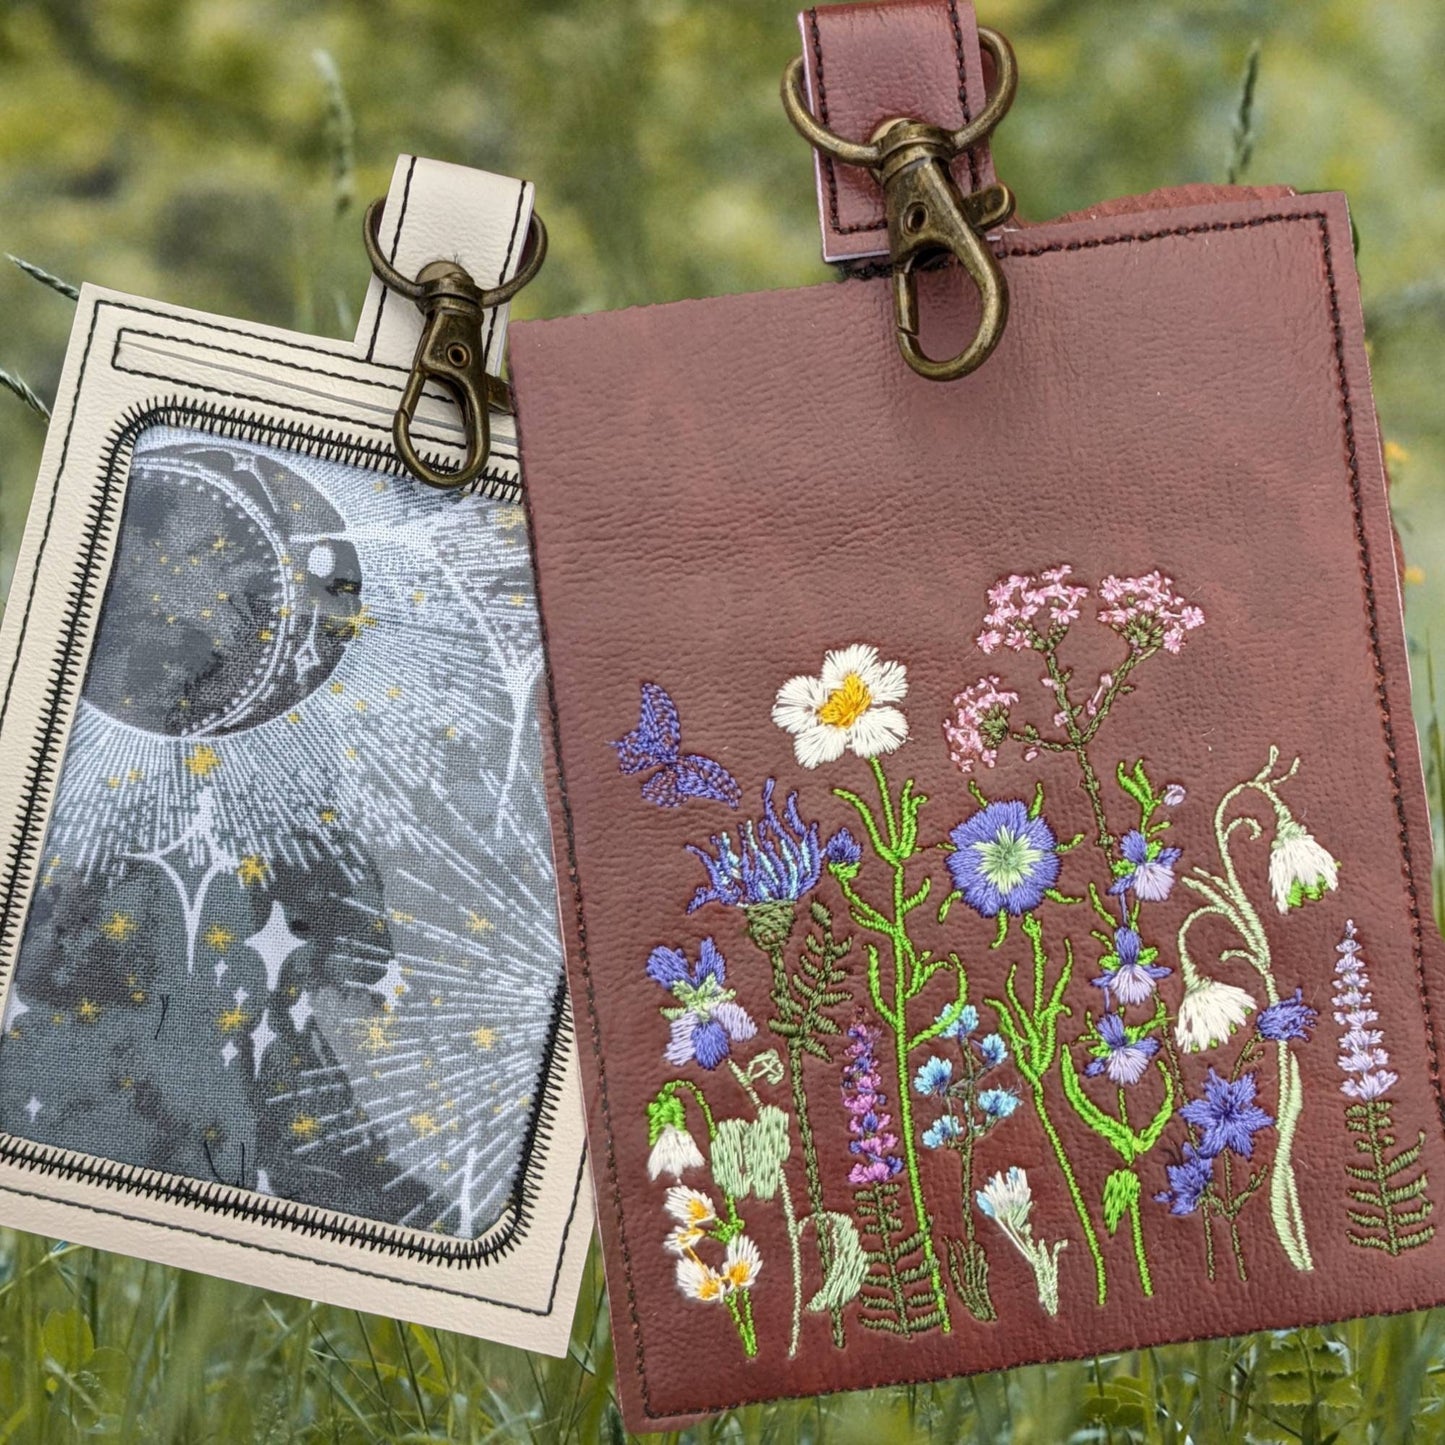 Wildflower vaccination card protector. Attach to purse, bag, backback or beltloops Vinyl, cork, leather.